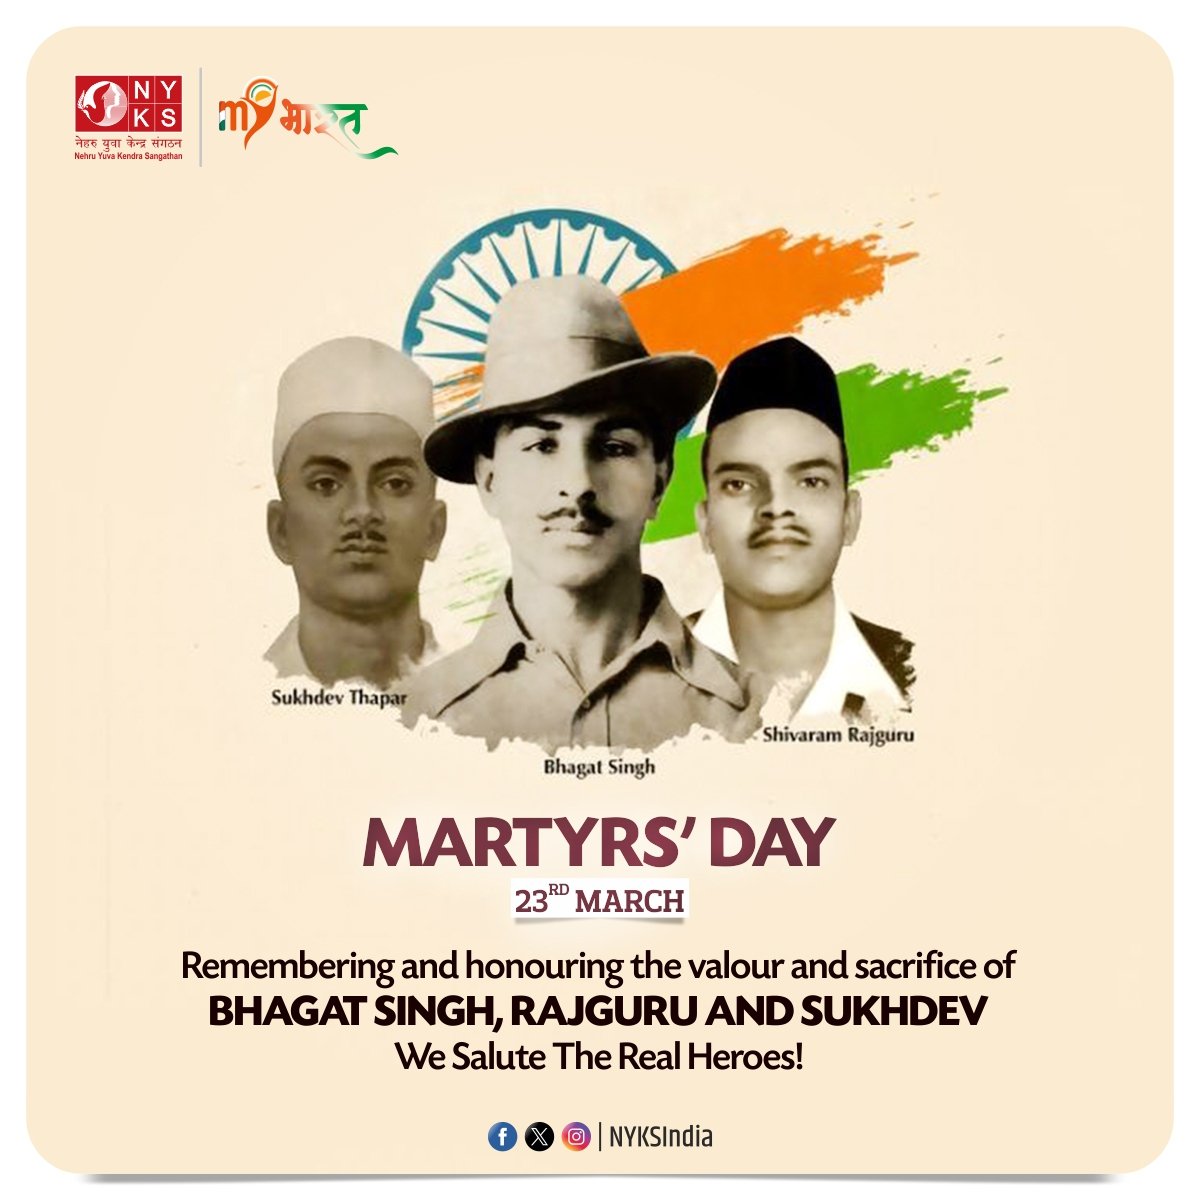 On #ShaheedDiwas, we pay homage to the great revolutionaries of Bharat Maa. Let us never forget the supreme sacrifice of Bhagat Singh, Shivaram Rajguru and Sukhdev Thapar for our nation's freedom. #ShaheedBhagatSingh #Rajguru #Sukhdev #23march #MartyrsDay